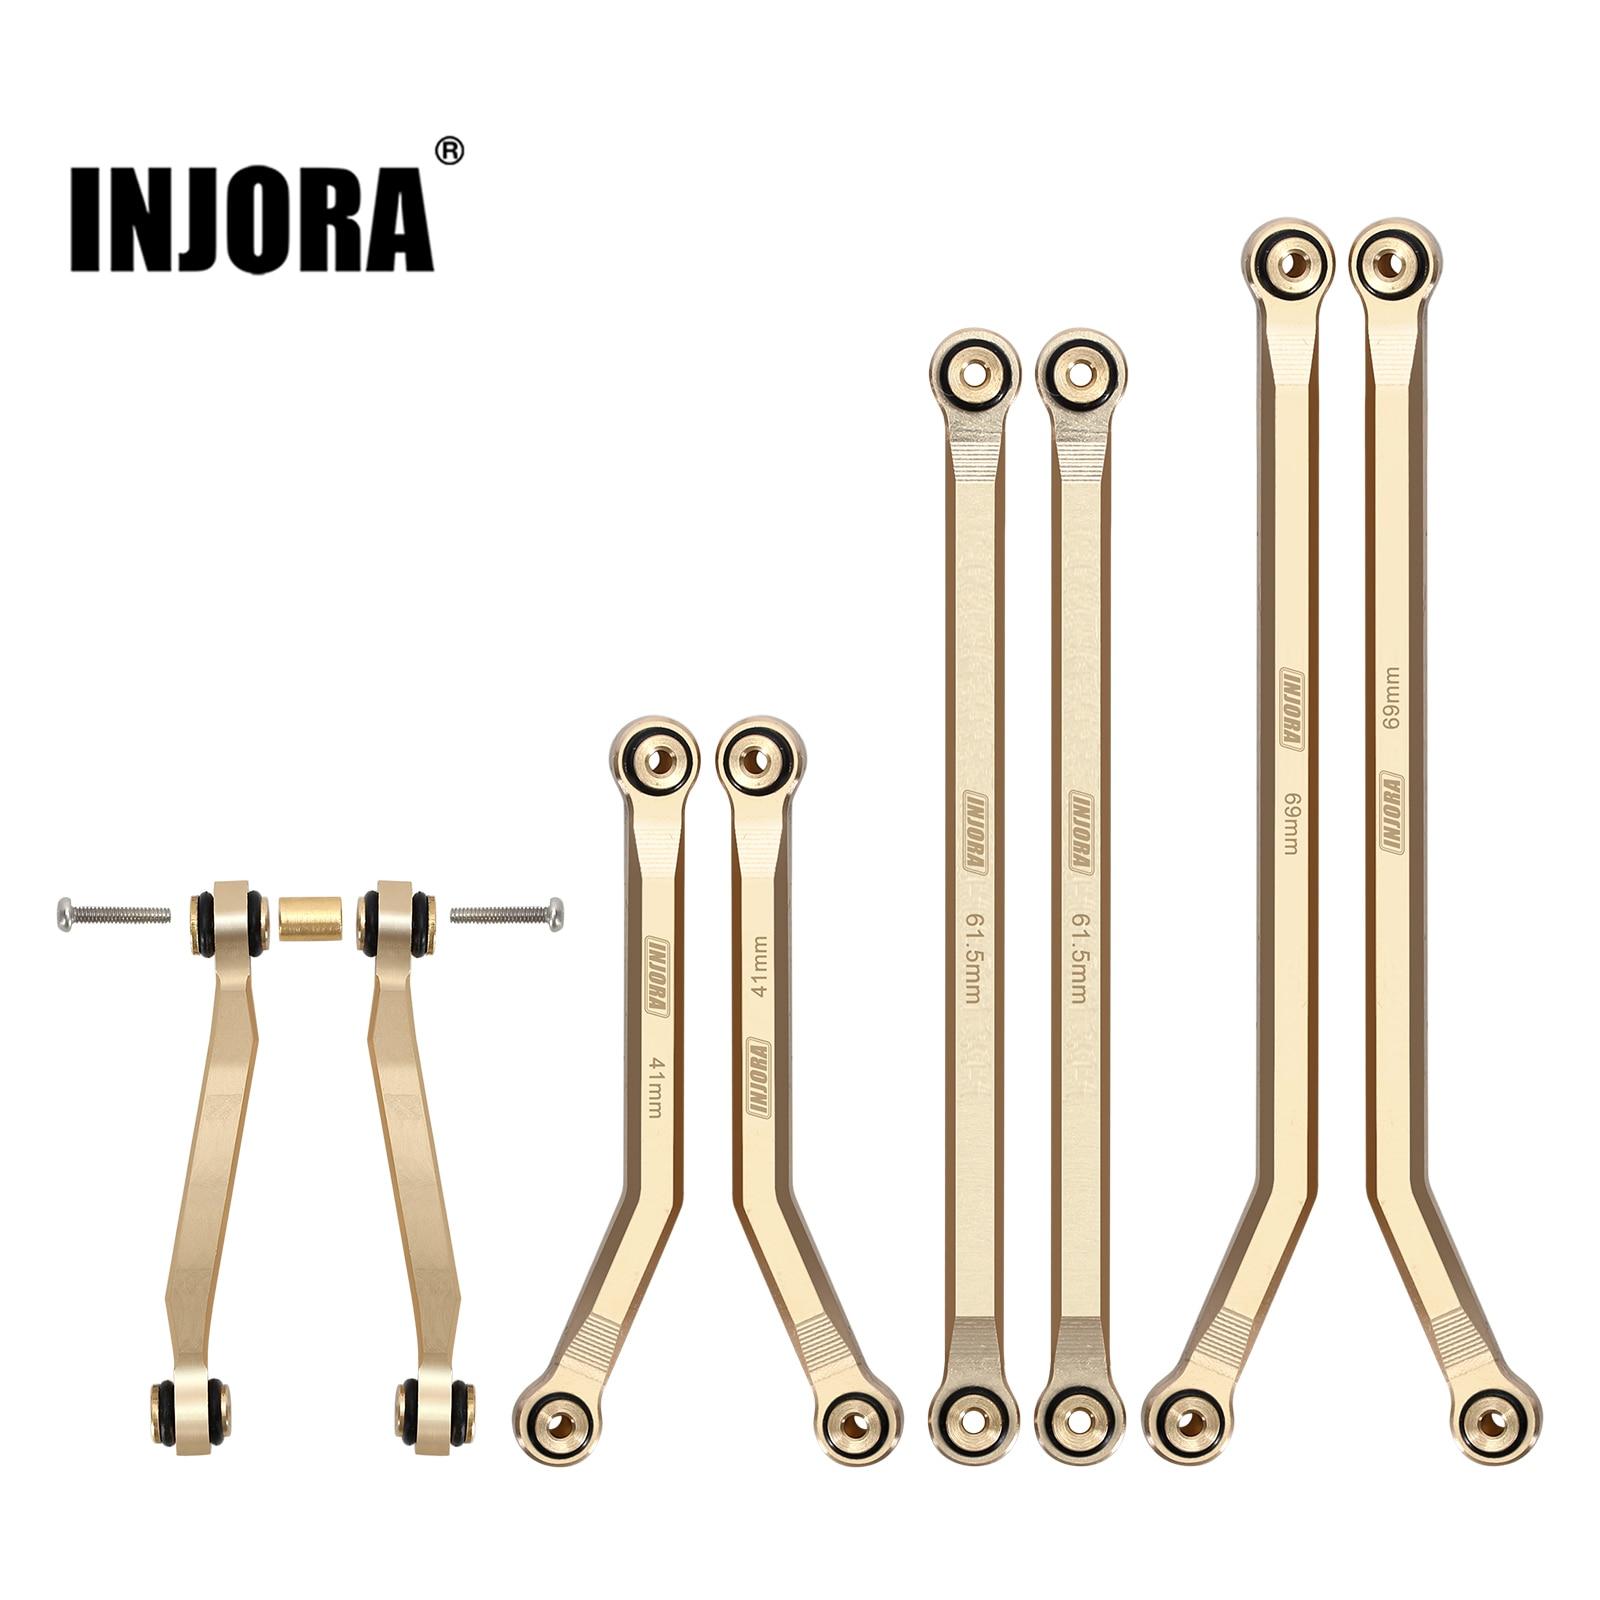 INJORA-36g-Heavy-Brass-High-Clearance-Chassis-4-Links-Set-for-1-24-RC-Crawler-Car.jpg